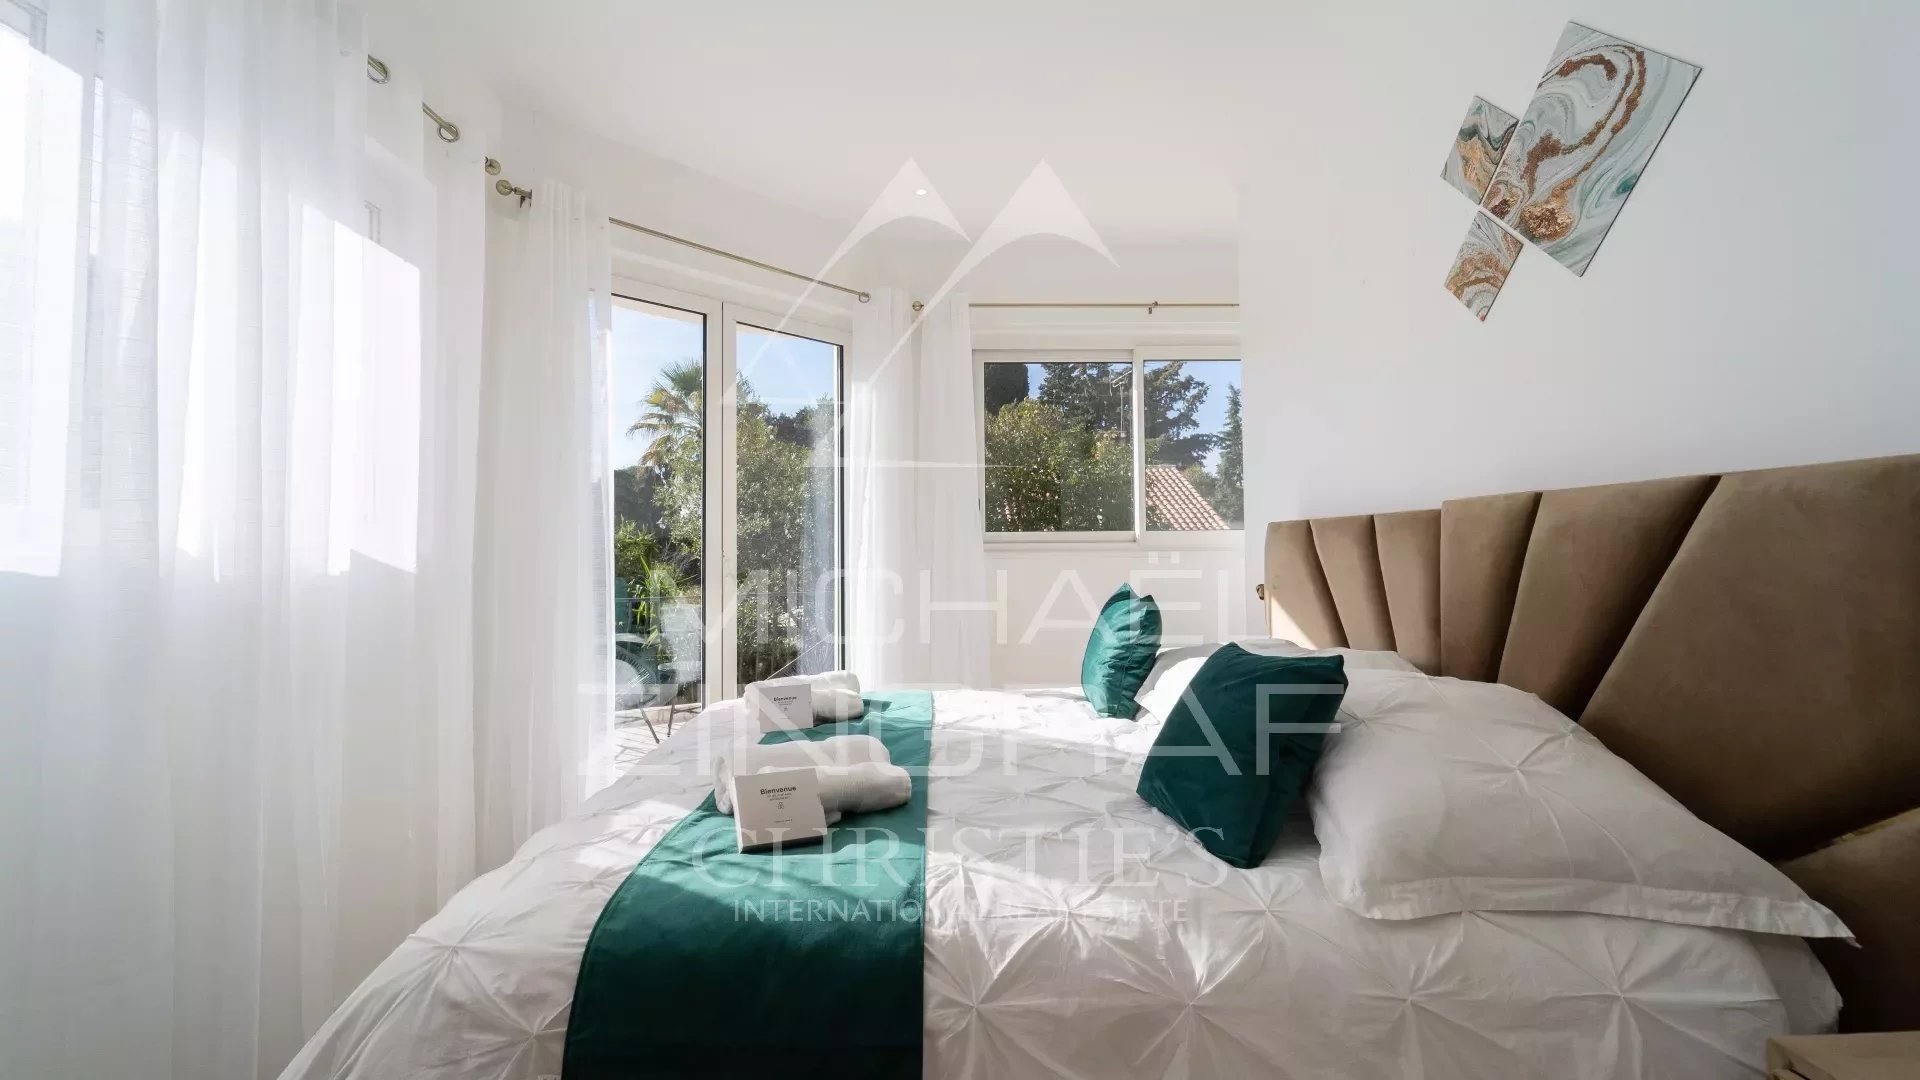 Cannes - 6 bedroom villa close to the beaches